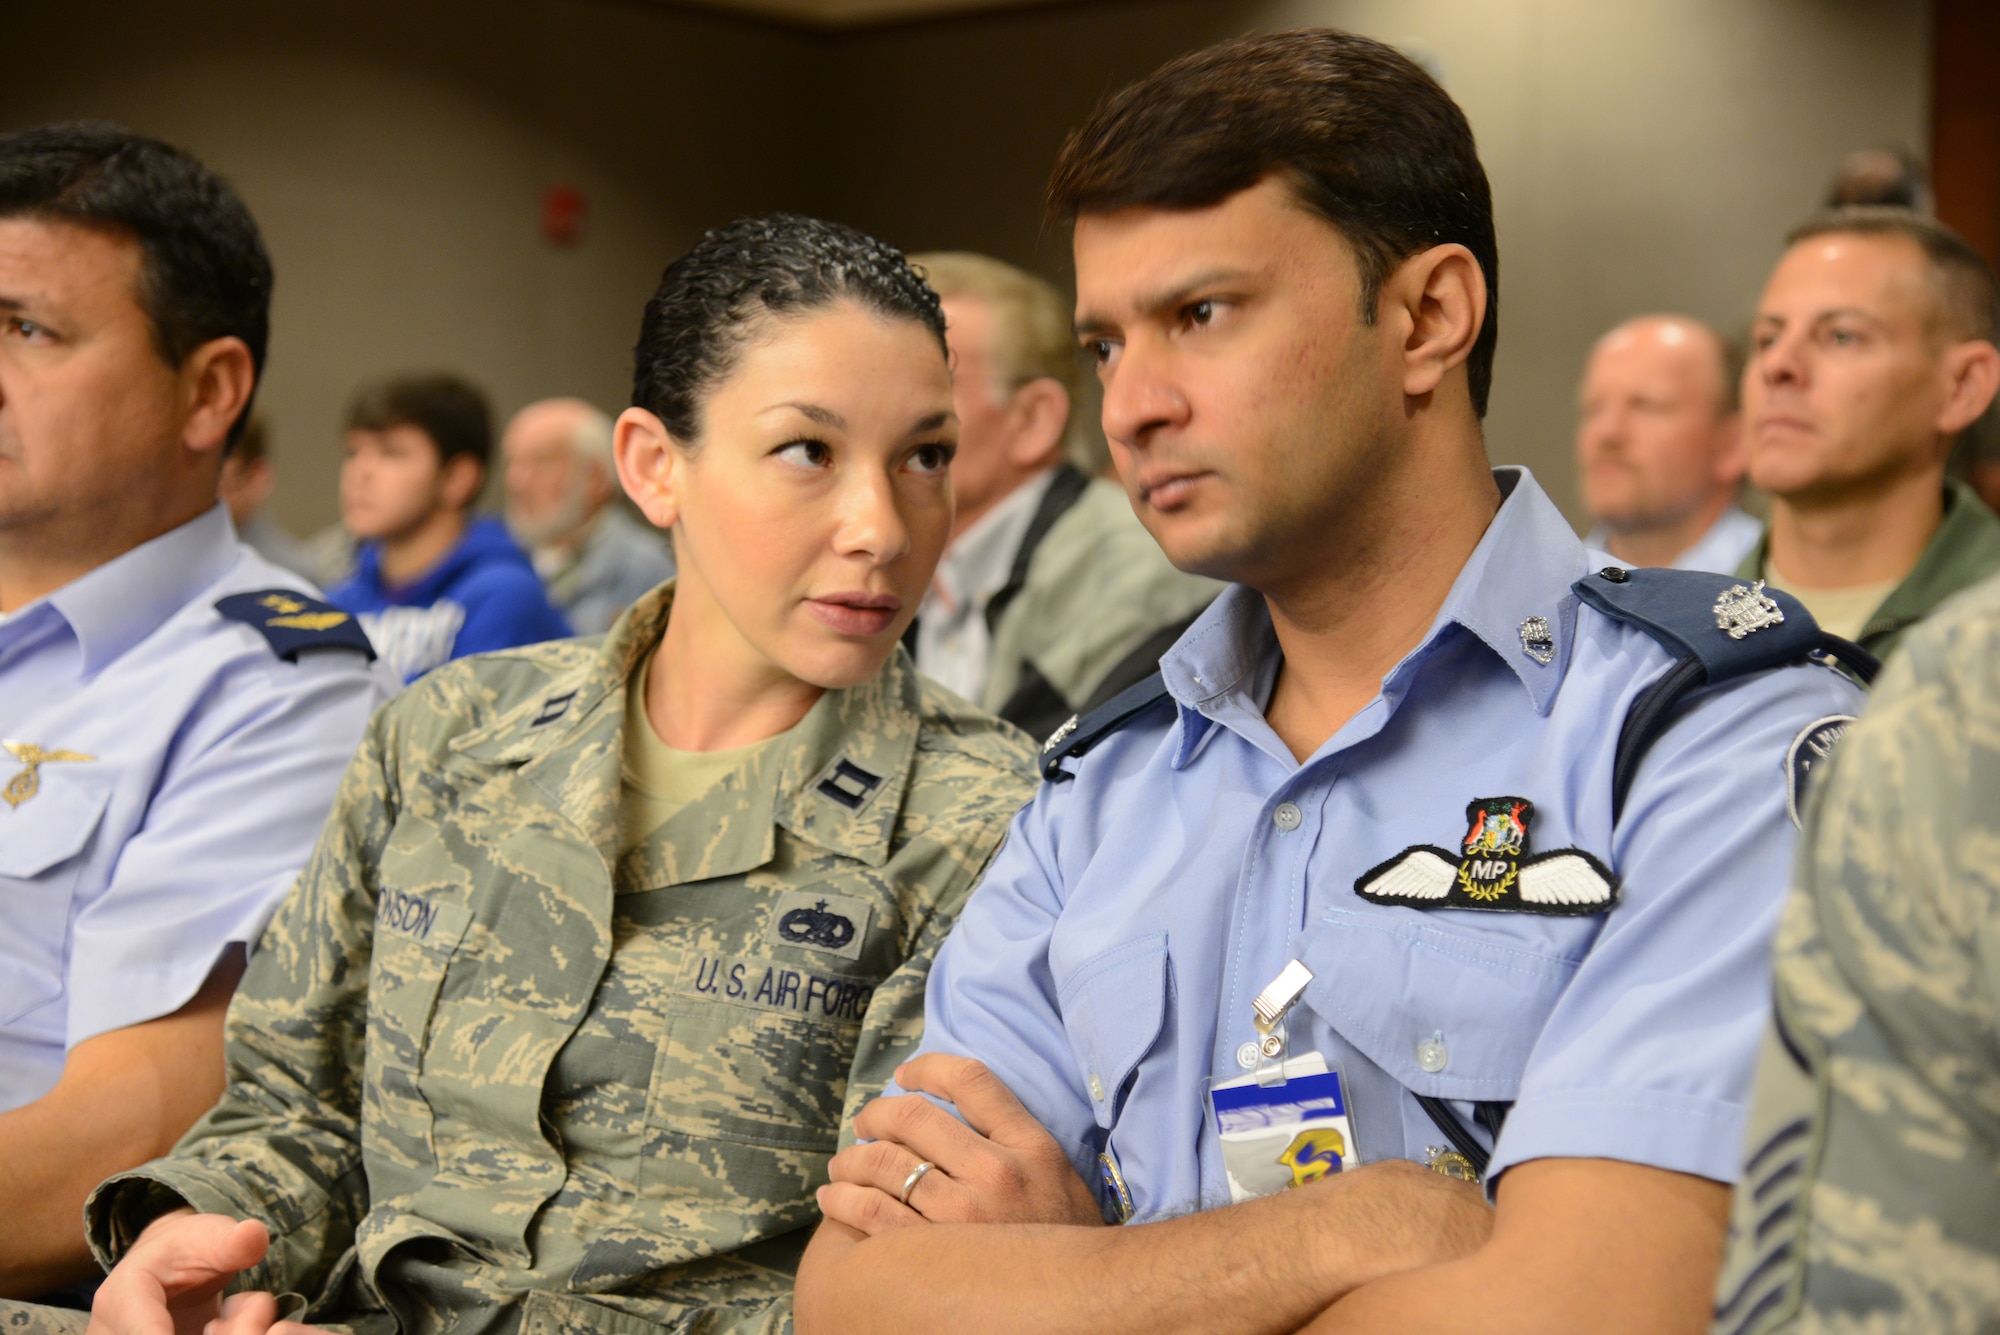 Capt. Shannon Antonson, United States Air Forces in Europe plans and requirements officer for African partnerships, talks to Maj. Sheik Ahad from Mauritius during the court observation portion of the Building Partner Aviation Capacity Course Dec. 11, 2012 in Ft. Walton Beach, Fla. By opening the course to international students, BPACC endeavors to build mutual understanding between the United States and partner nations on the unique environments and opportunities to bolster national security measures. (U.S. Air Force photo by Senior Airman Melanie Holochwost)